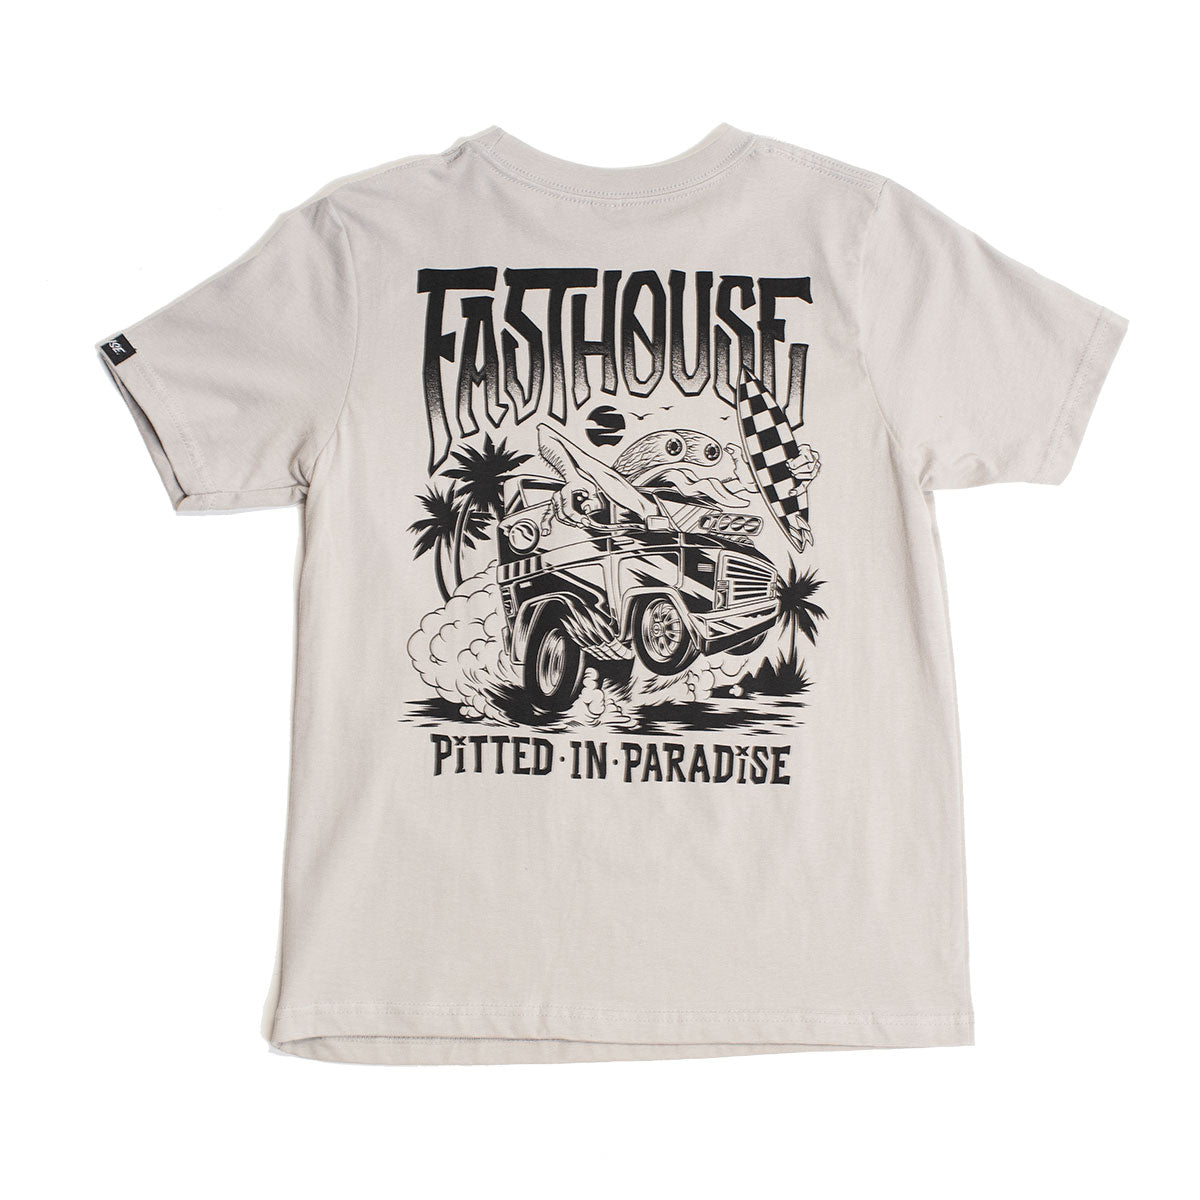 Pitted Youth Tee - Light Gray